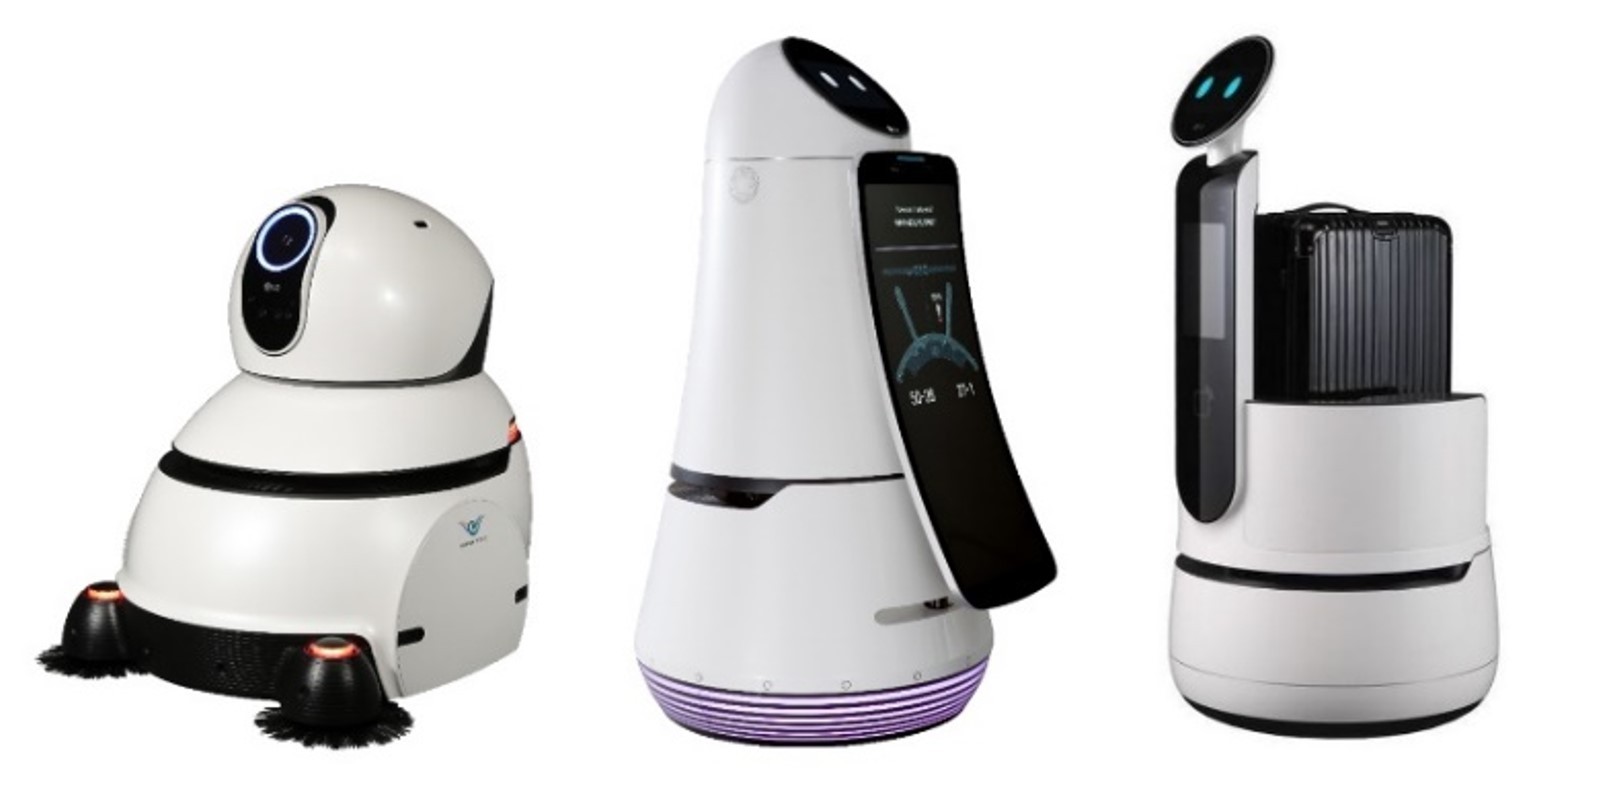 LG’s commercial robots – the Cleaning Robot, Airport Guide Robot and Porter Robot